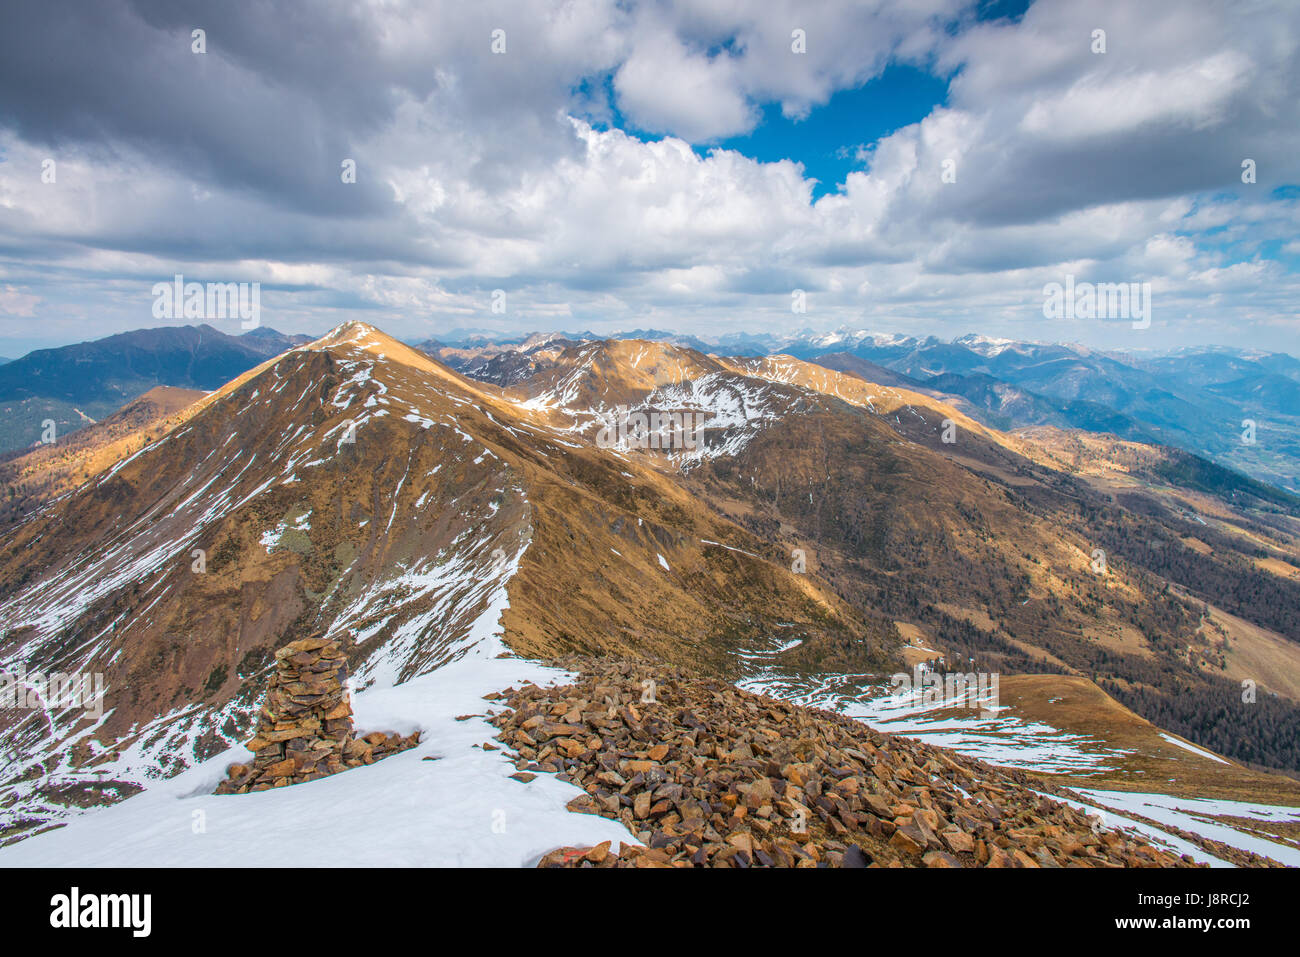 Summit view from the top of Mount Fravort, Italian Alps, looking towards Valsugana and other snowy mountain tops. Stock Photo